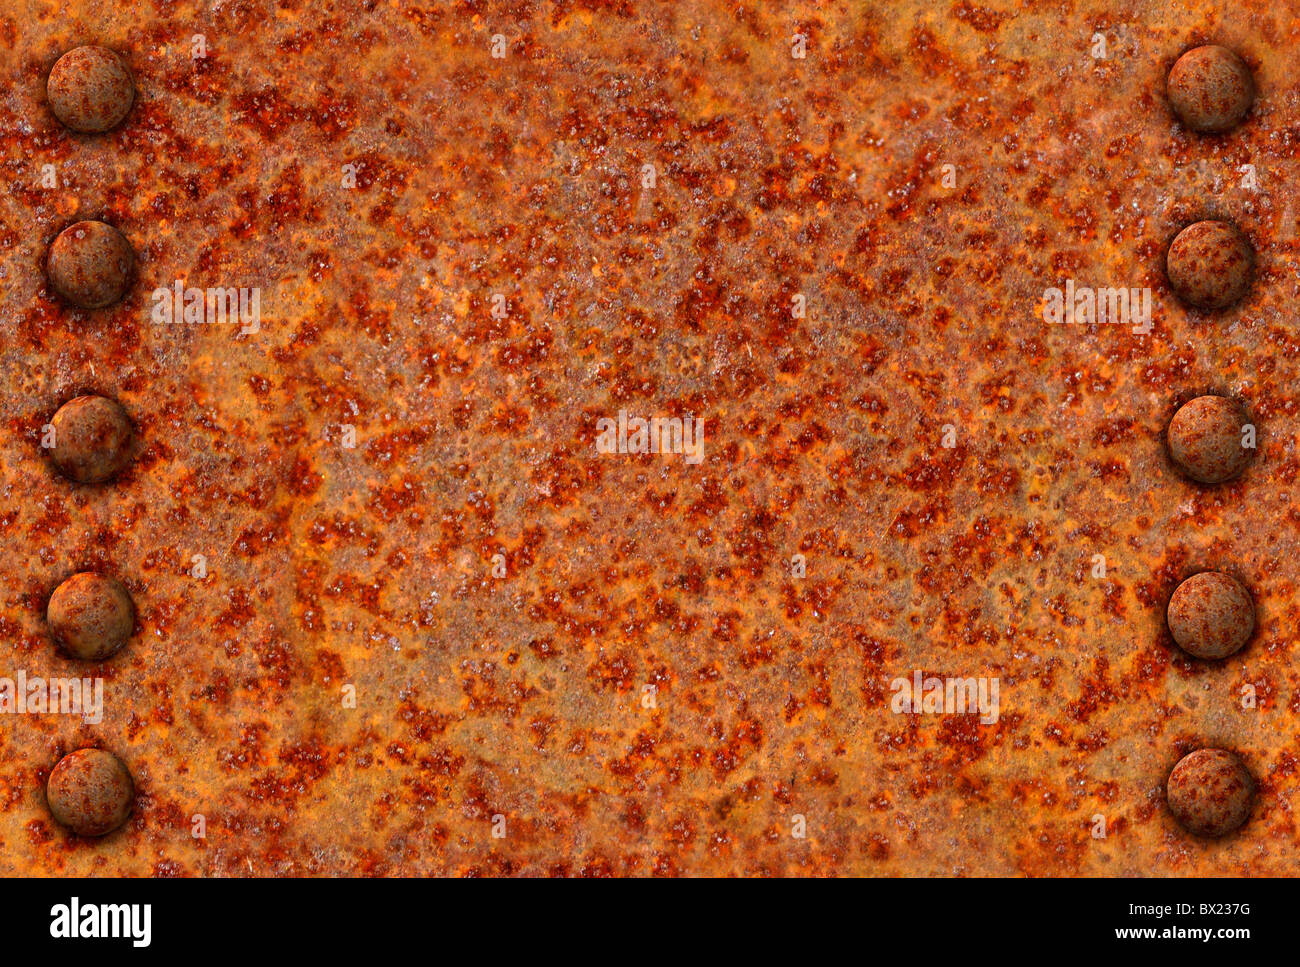 Rusted metal surface with rivet bolts seamlessly tileable Stock Photo